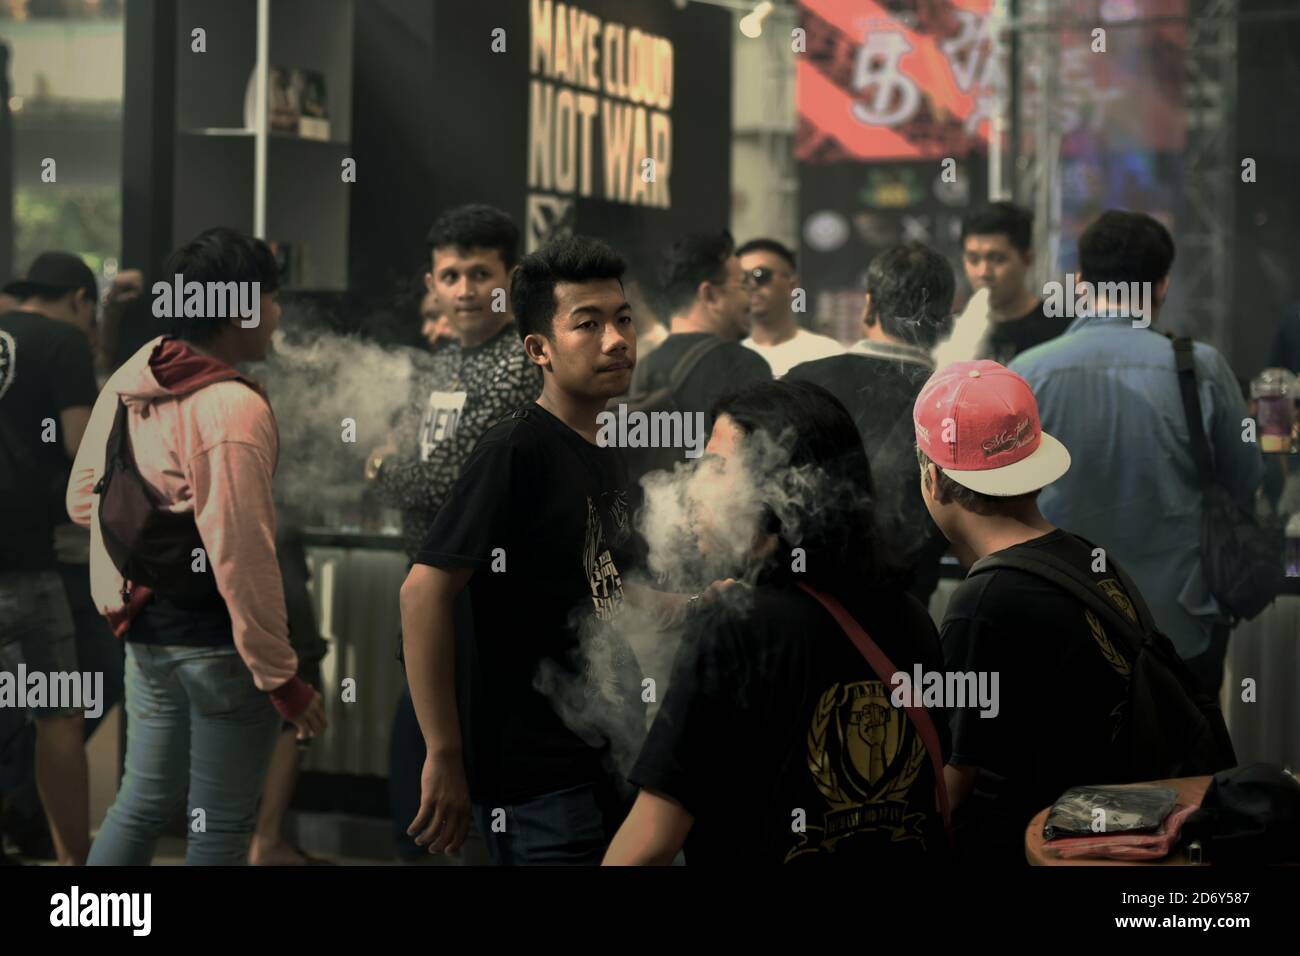 Crowds during a vape fair in South Jakarta, Jakarta, Indonesia. Stock Photo